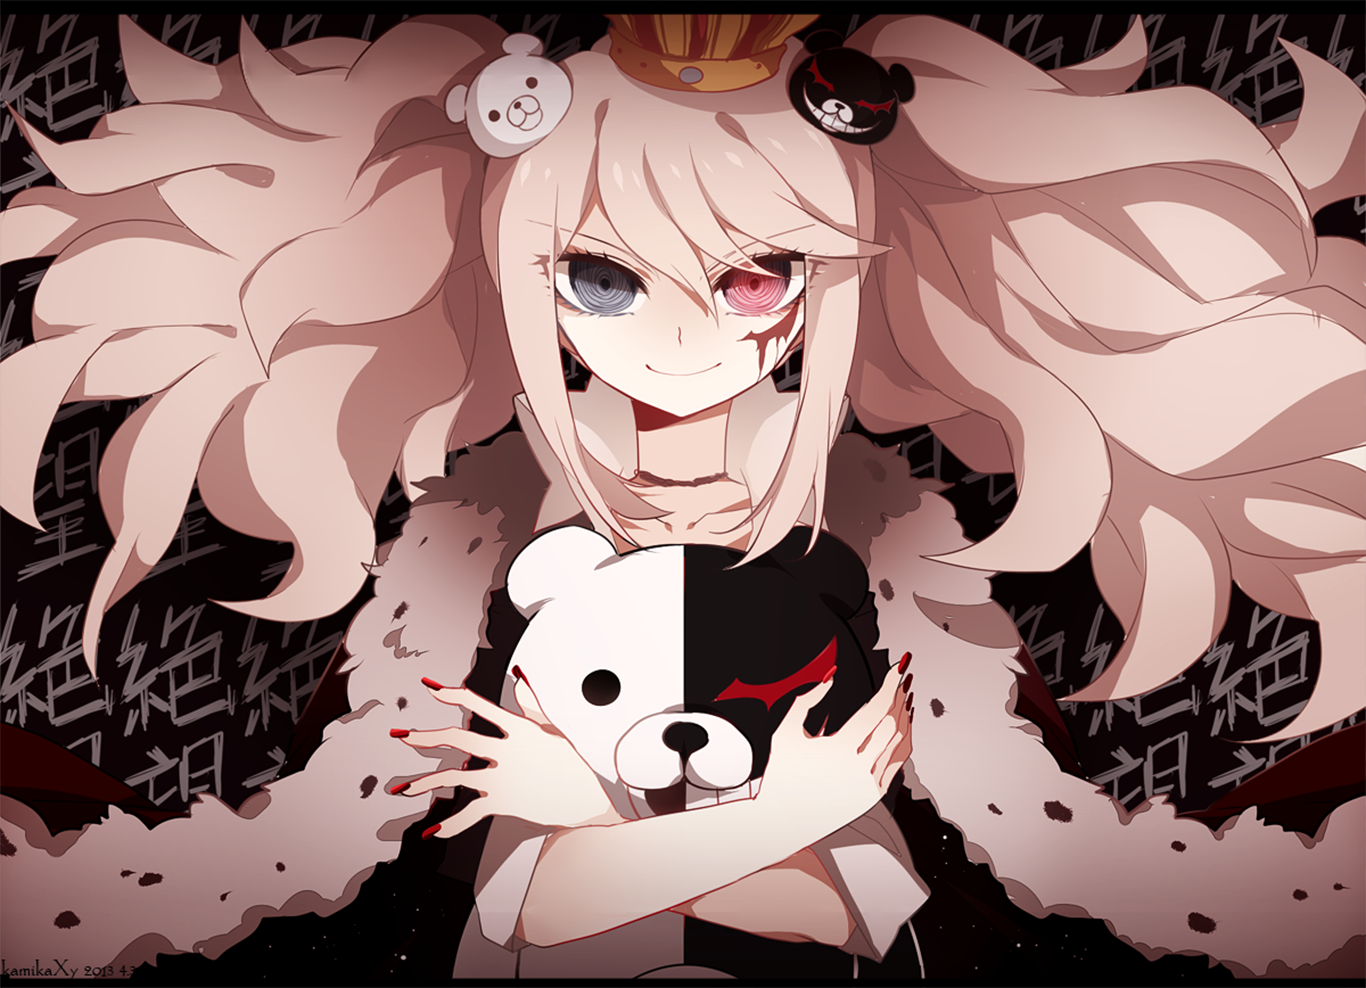 155 Danganronpa Hd Wallpapers Background Images Wallpaper Abyss Images, Photos, Reviews